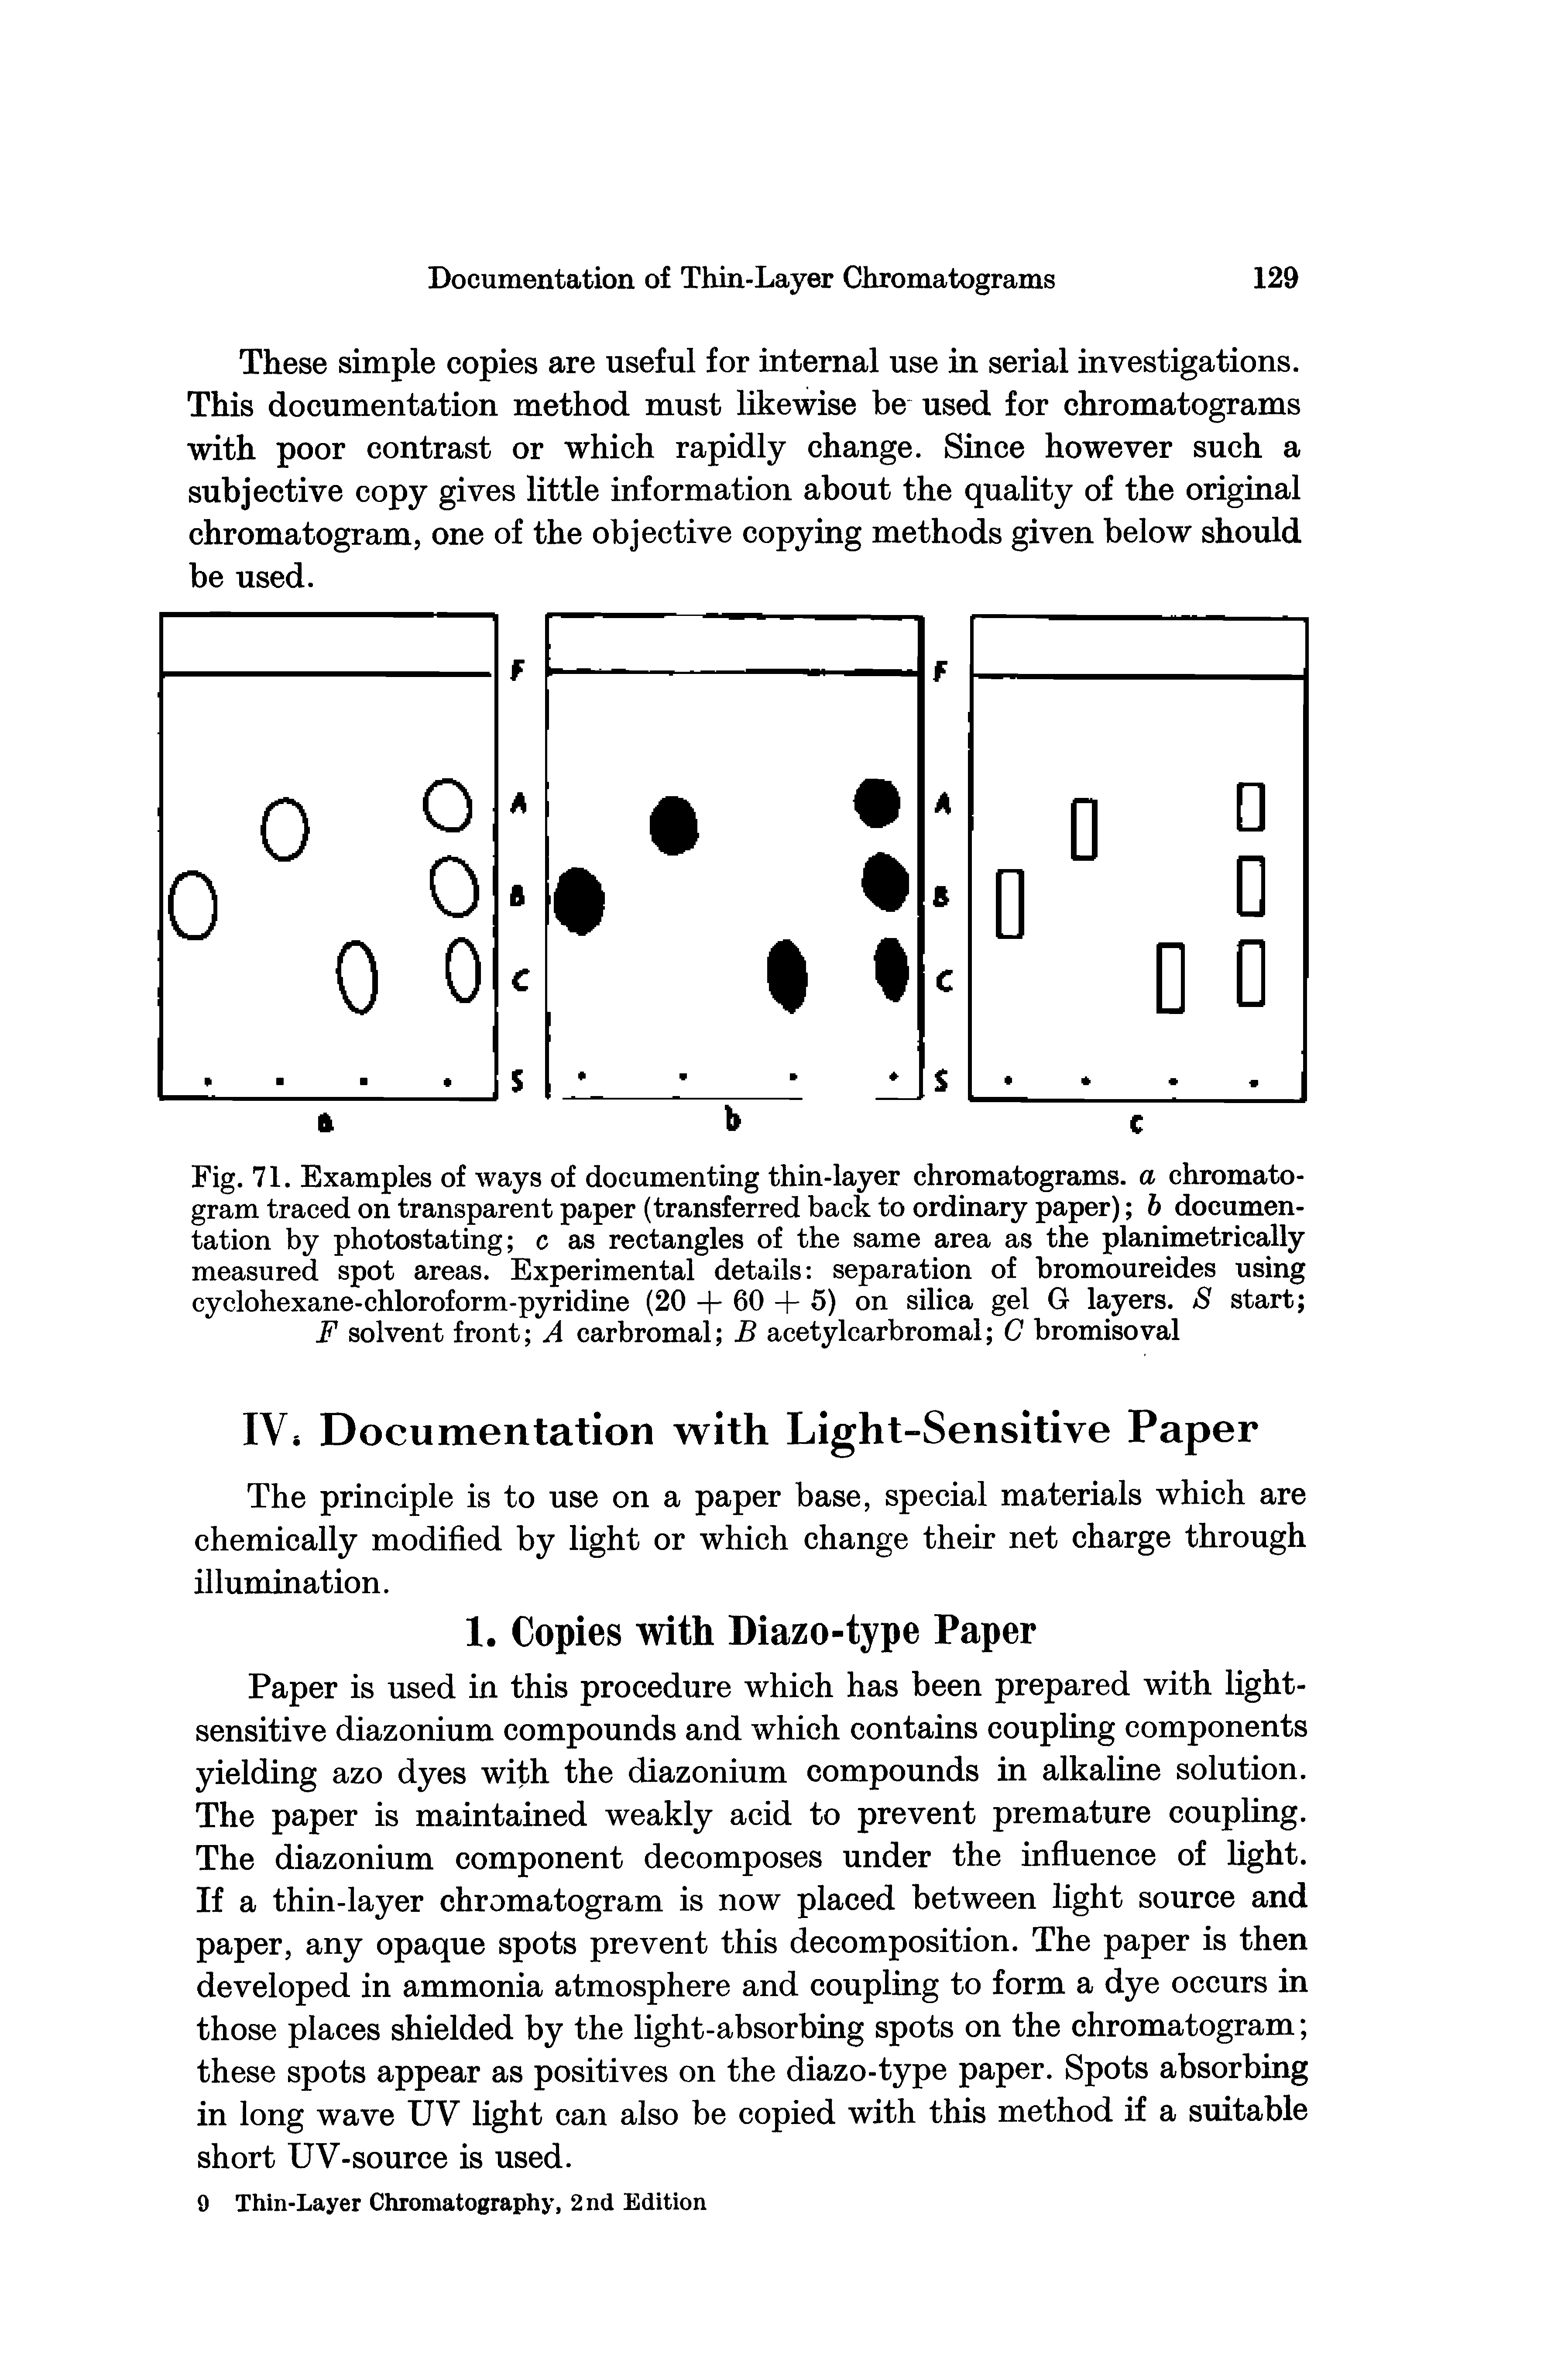 Fig. 71. Examples of ways of documenting thin-layer chromatograms, a chromatogram traced on transparent paper (transferred back to ordinary paper) h documentation by photostating c as rectangles of the same area as the planimetrically measured spot areas. Experimental details separation of bromoureides using cyclohexane-chloroform-pyridine (20 + 60 -f 5) on silica gel G layers. 8 start ...